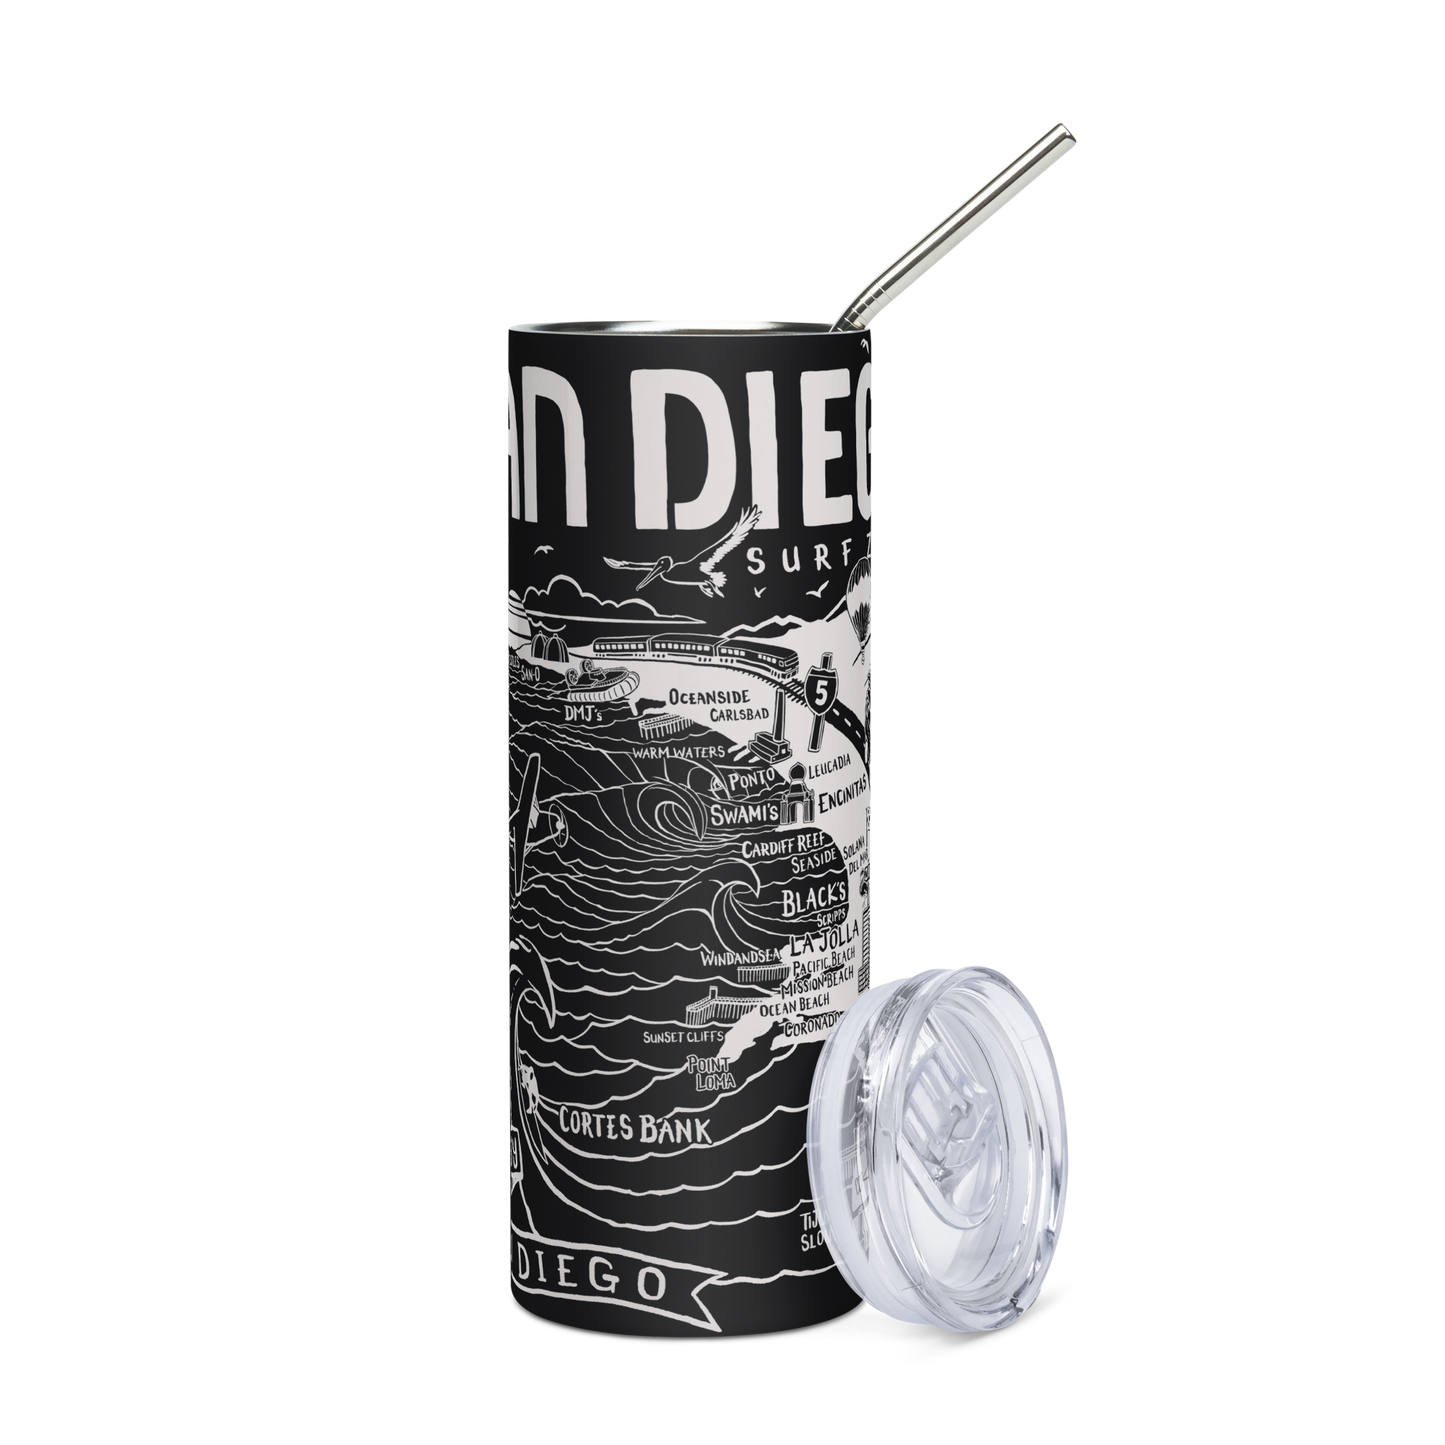 SAN DIEGO Stainless Steel Map Tumbler